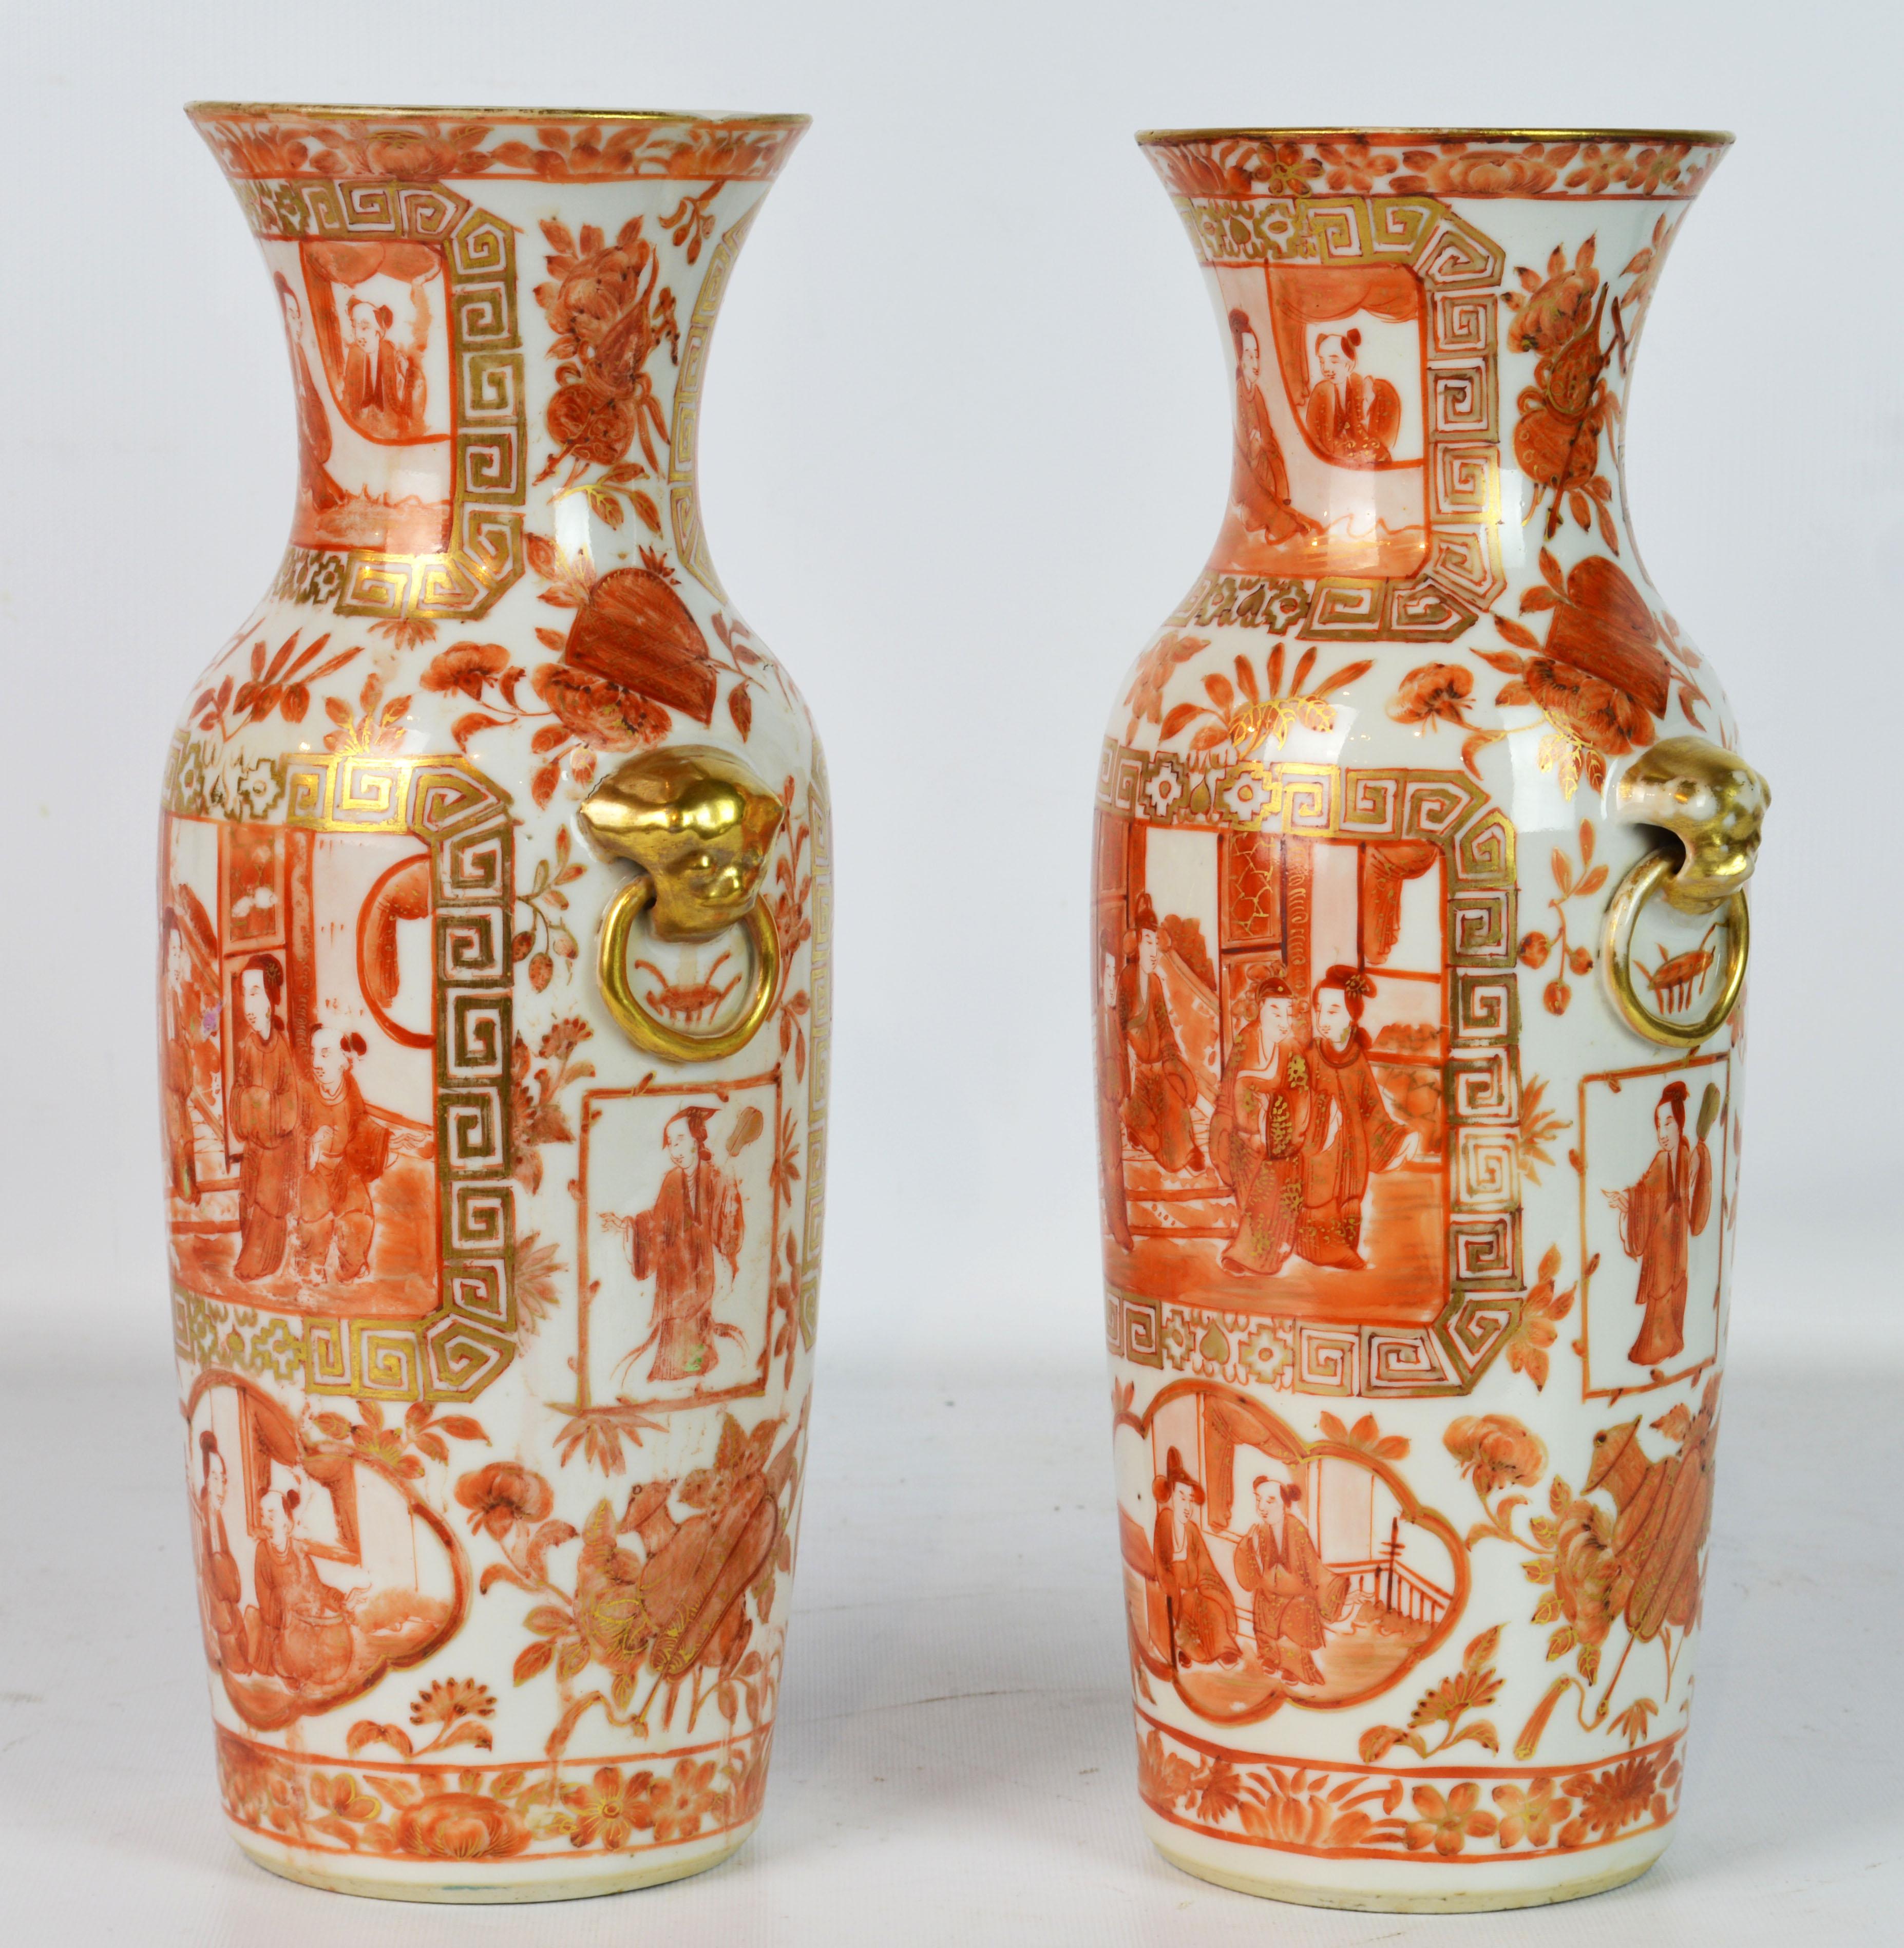 This fine pair of Chinese export vases feature white ground with rich orange and gilt enamel decoration showing domestic scenes, flowers and leafwork. They likely date to the Daoguang dynasty, circa 1840.